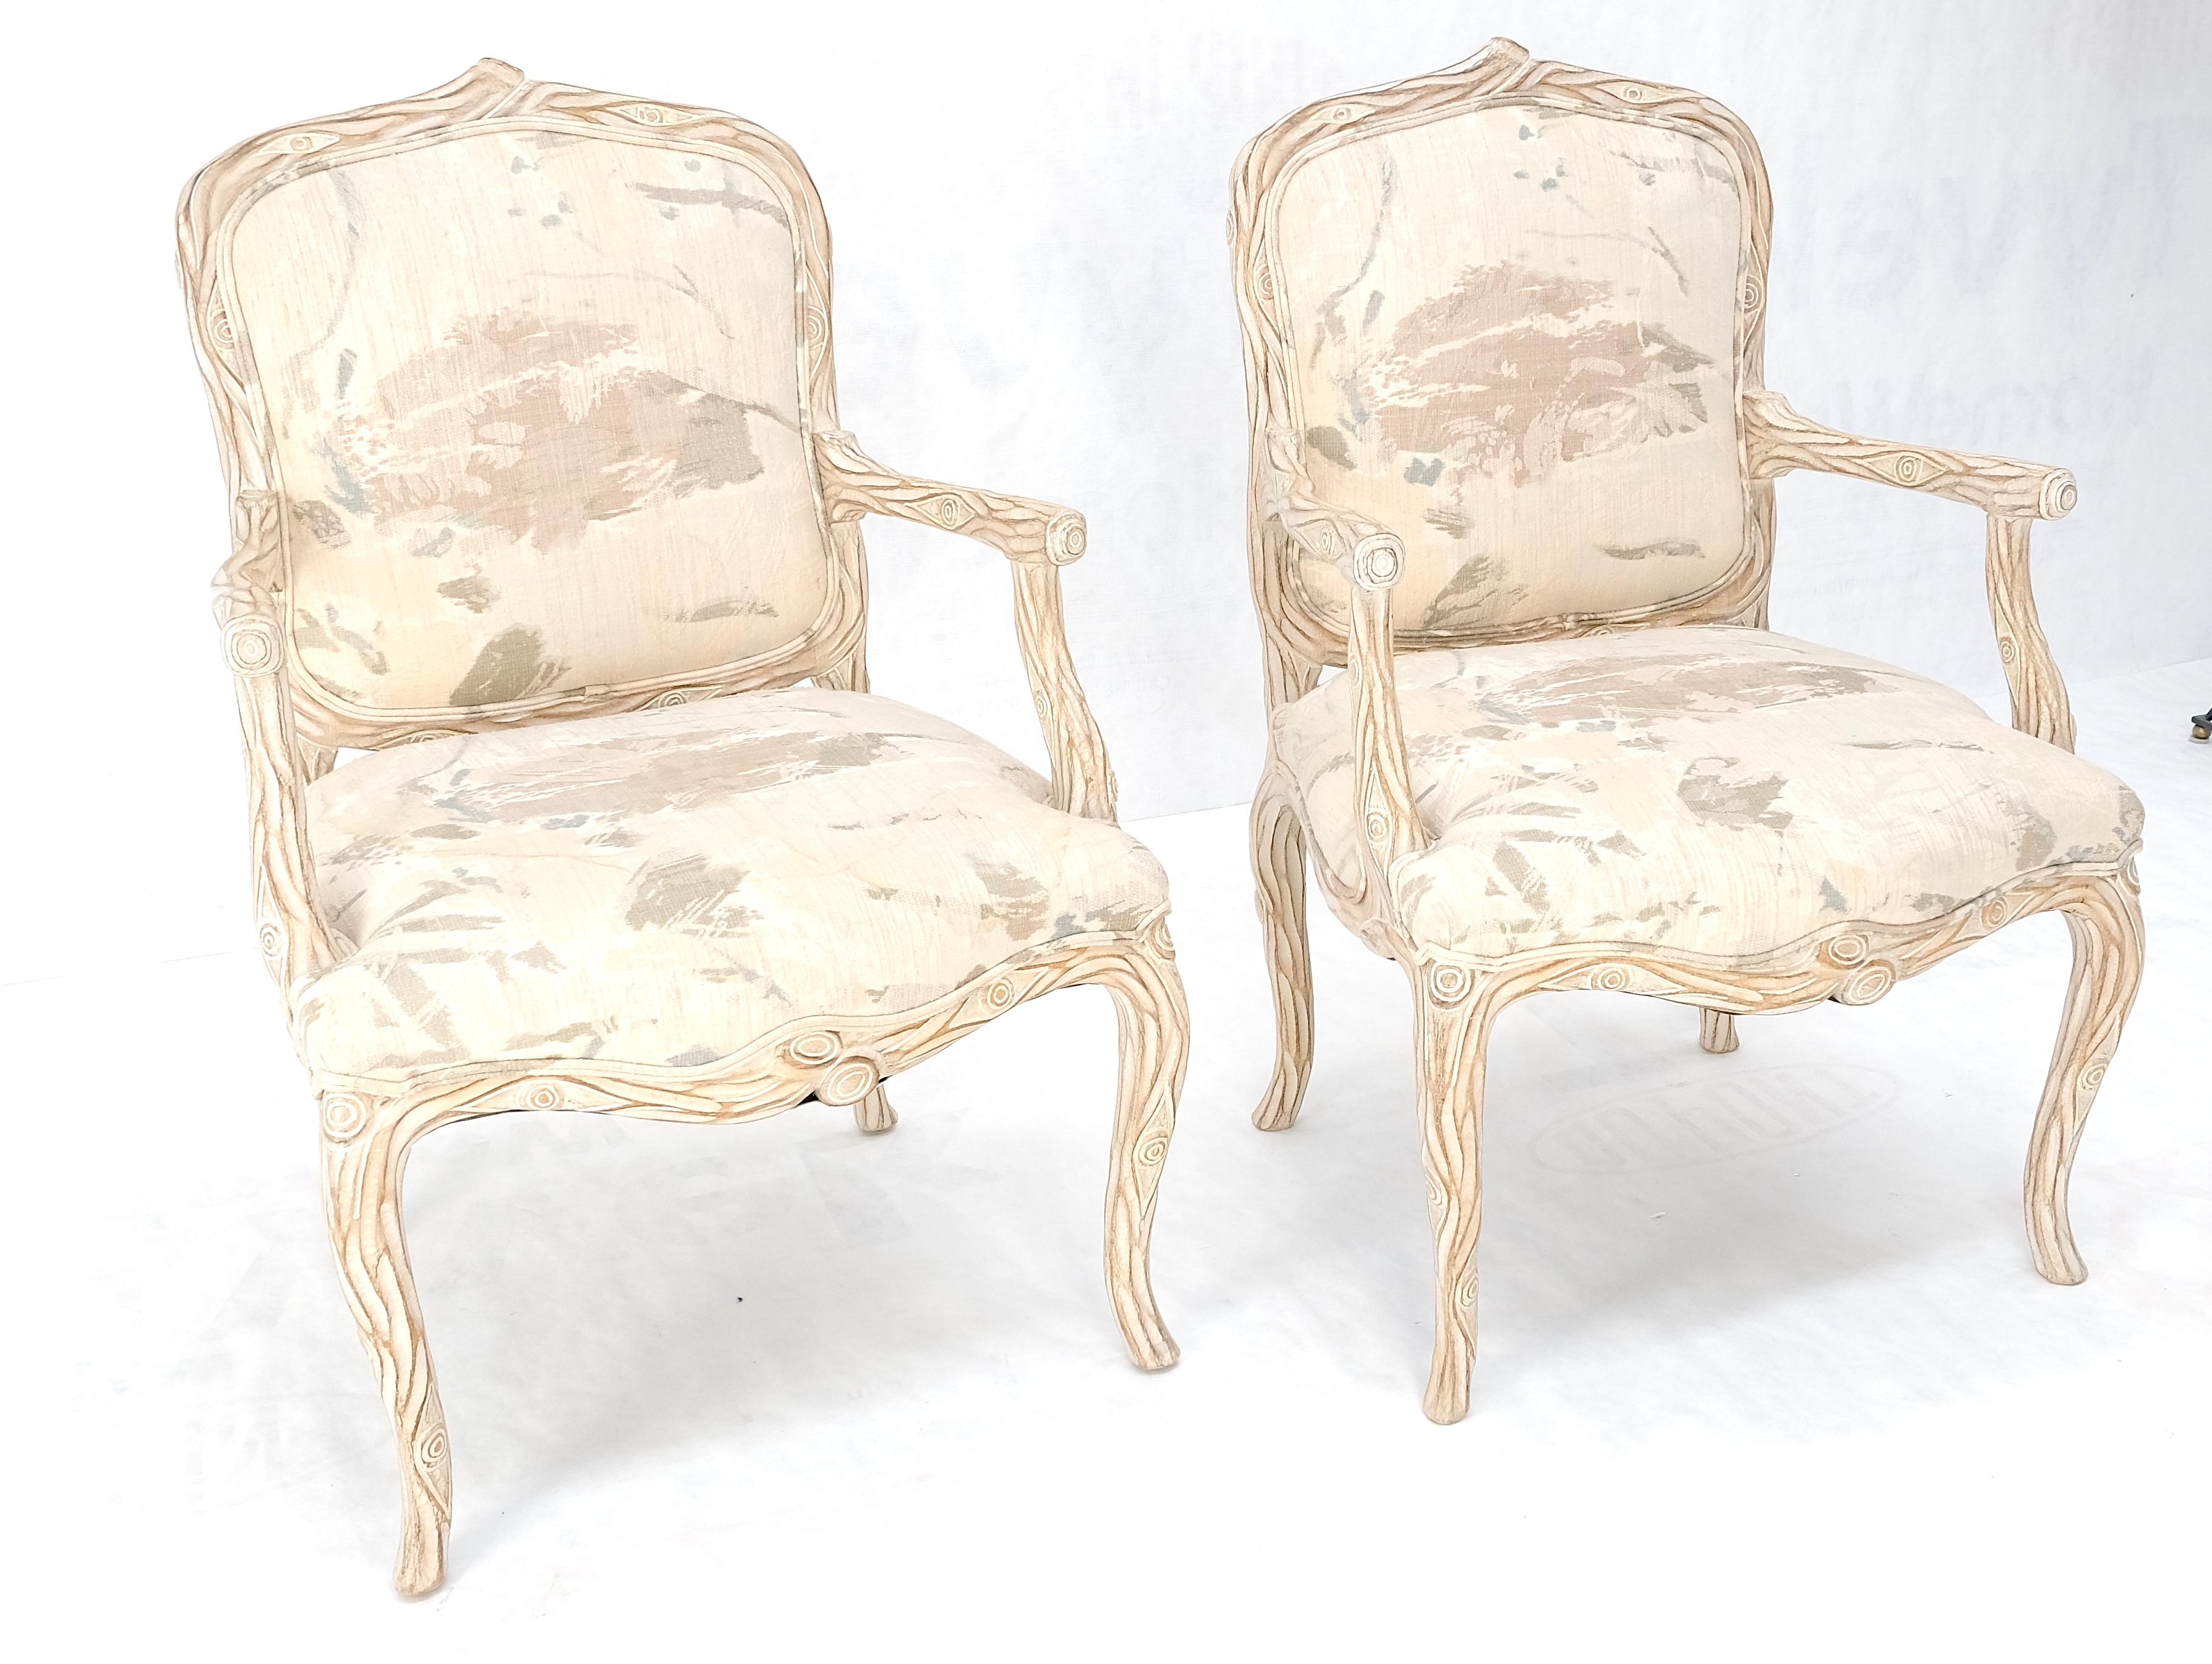 Faux Carved Twig Wood & Eye Theme Arm Lounge Fireside Arm Chairs White Wash MINT In Good Condition For Sale In Rockaway, NJ